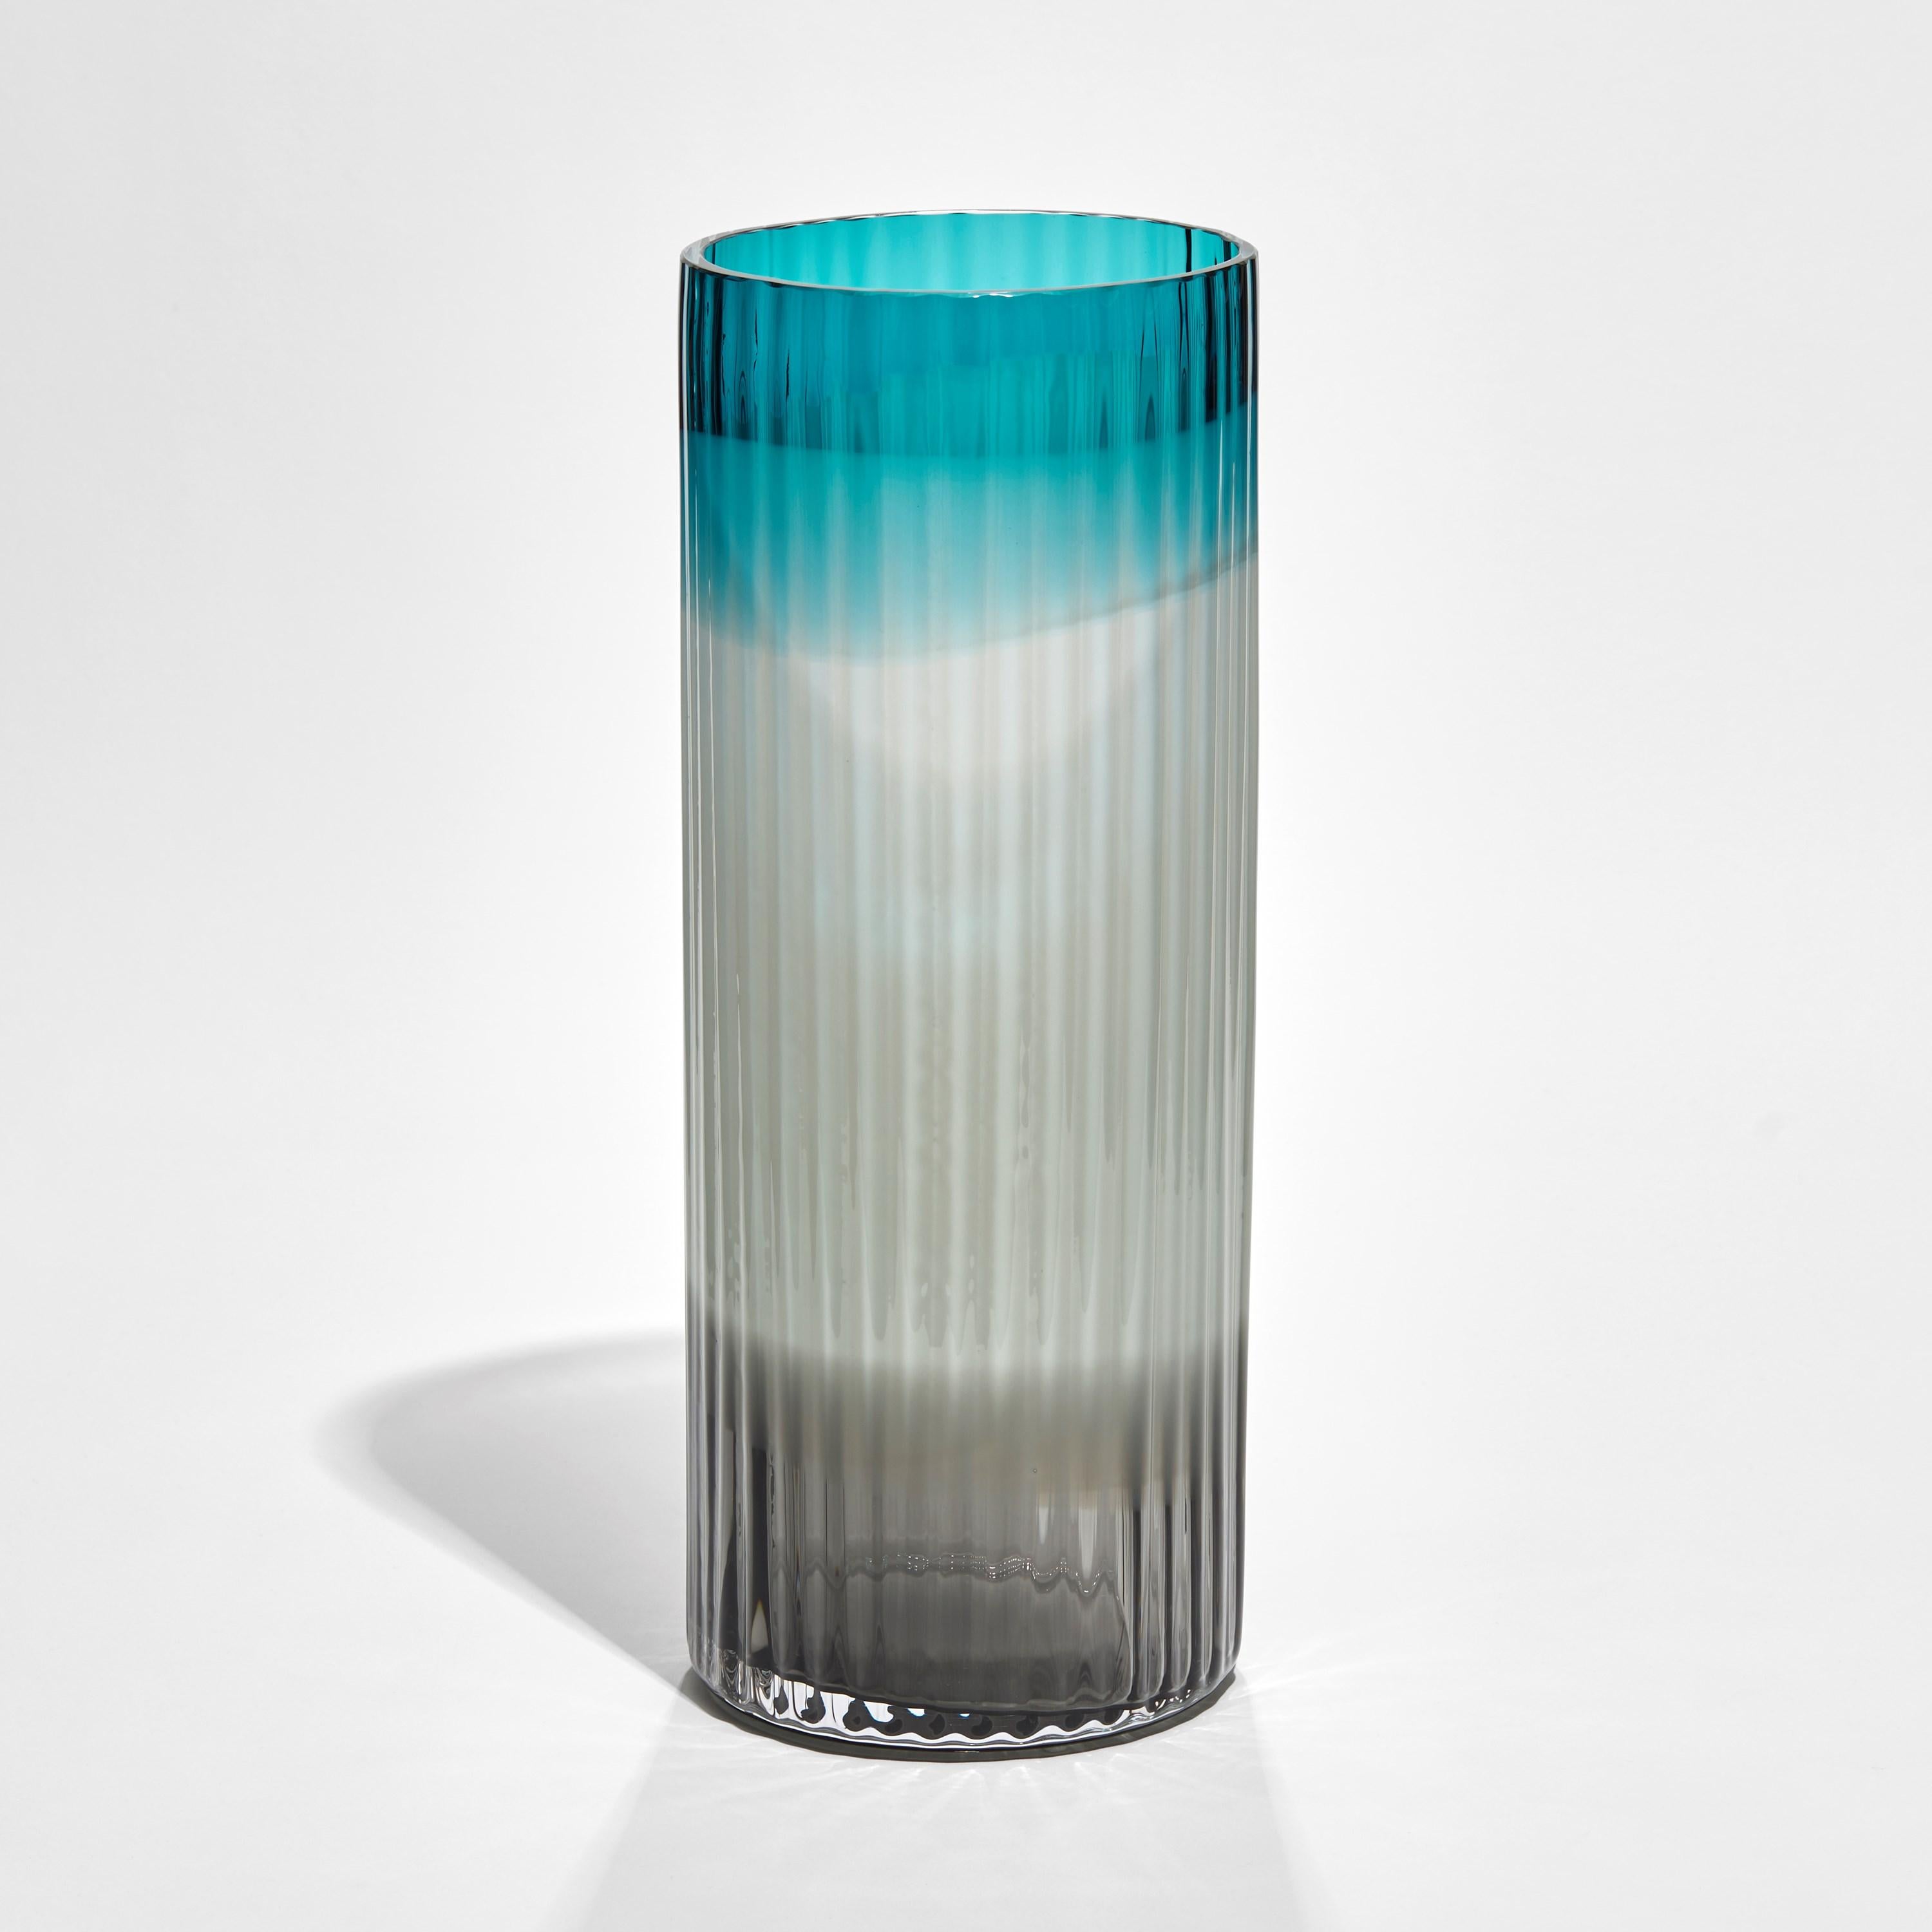 'Plissé vase in Turquoise, light blue & black' is a limited edition vase by the Swedish artist and designer, Lena Bergström.

Created for 'Lena 25+', Bergström's 2022 solo exhibition celebrating the 25 years and more for which she has been